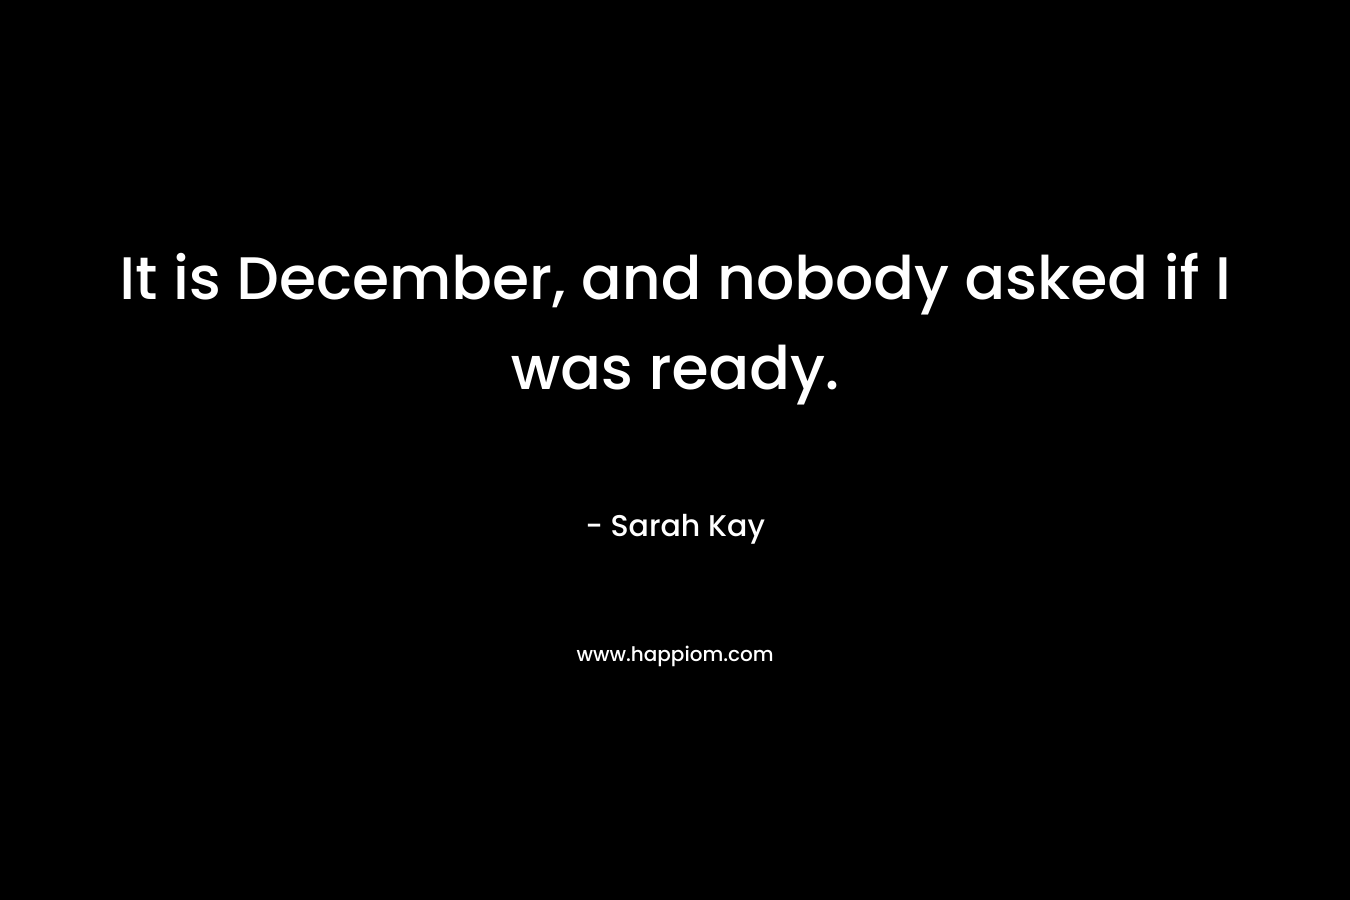 It is December, and nobody asked if I was ready. – Sarah Kay